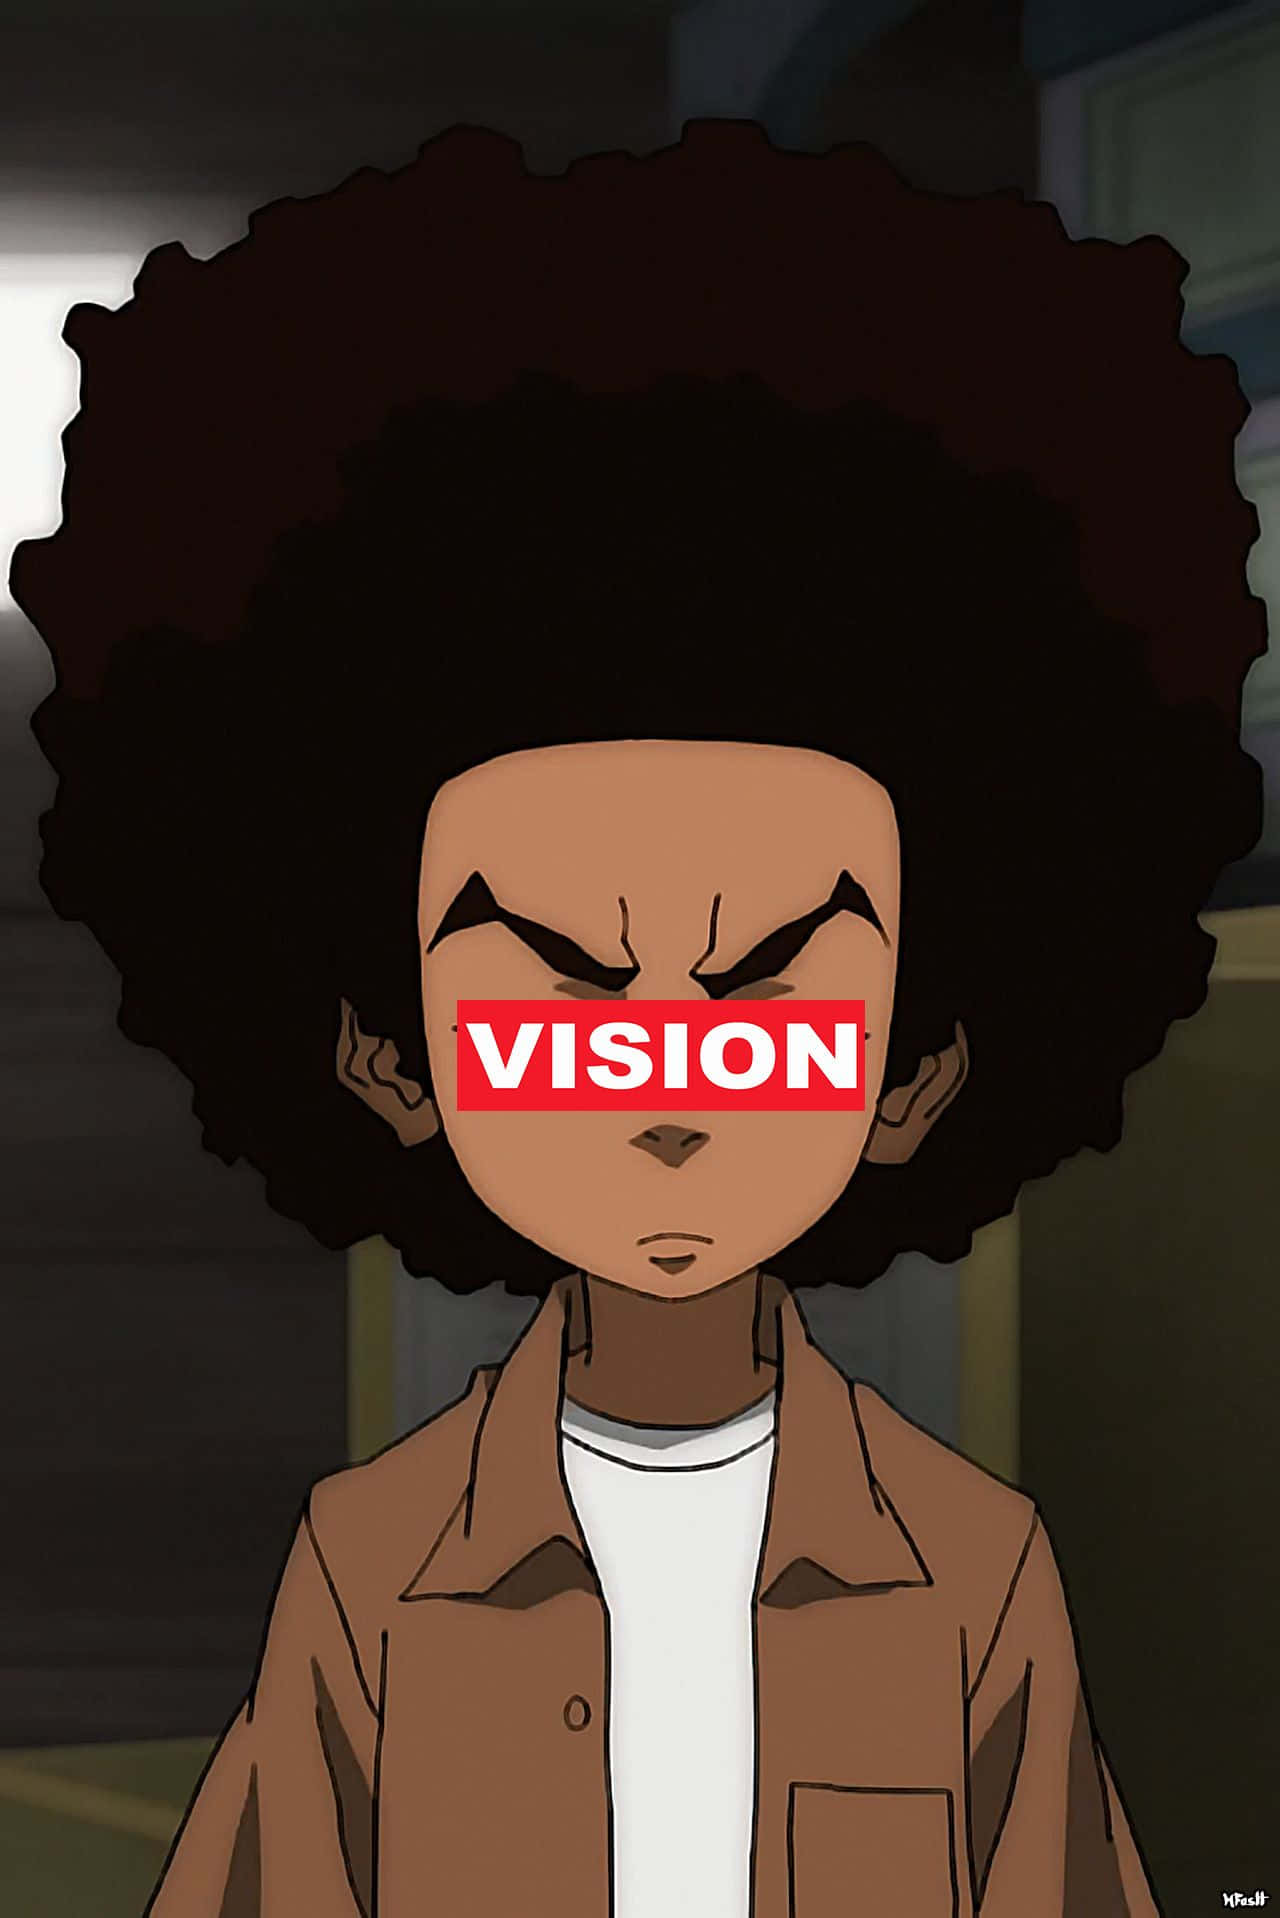 Boondockspfp Vision Would Be Translated To 